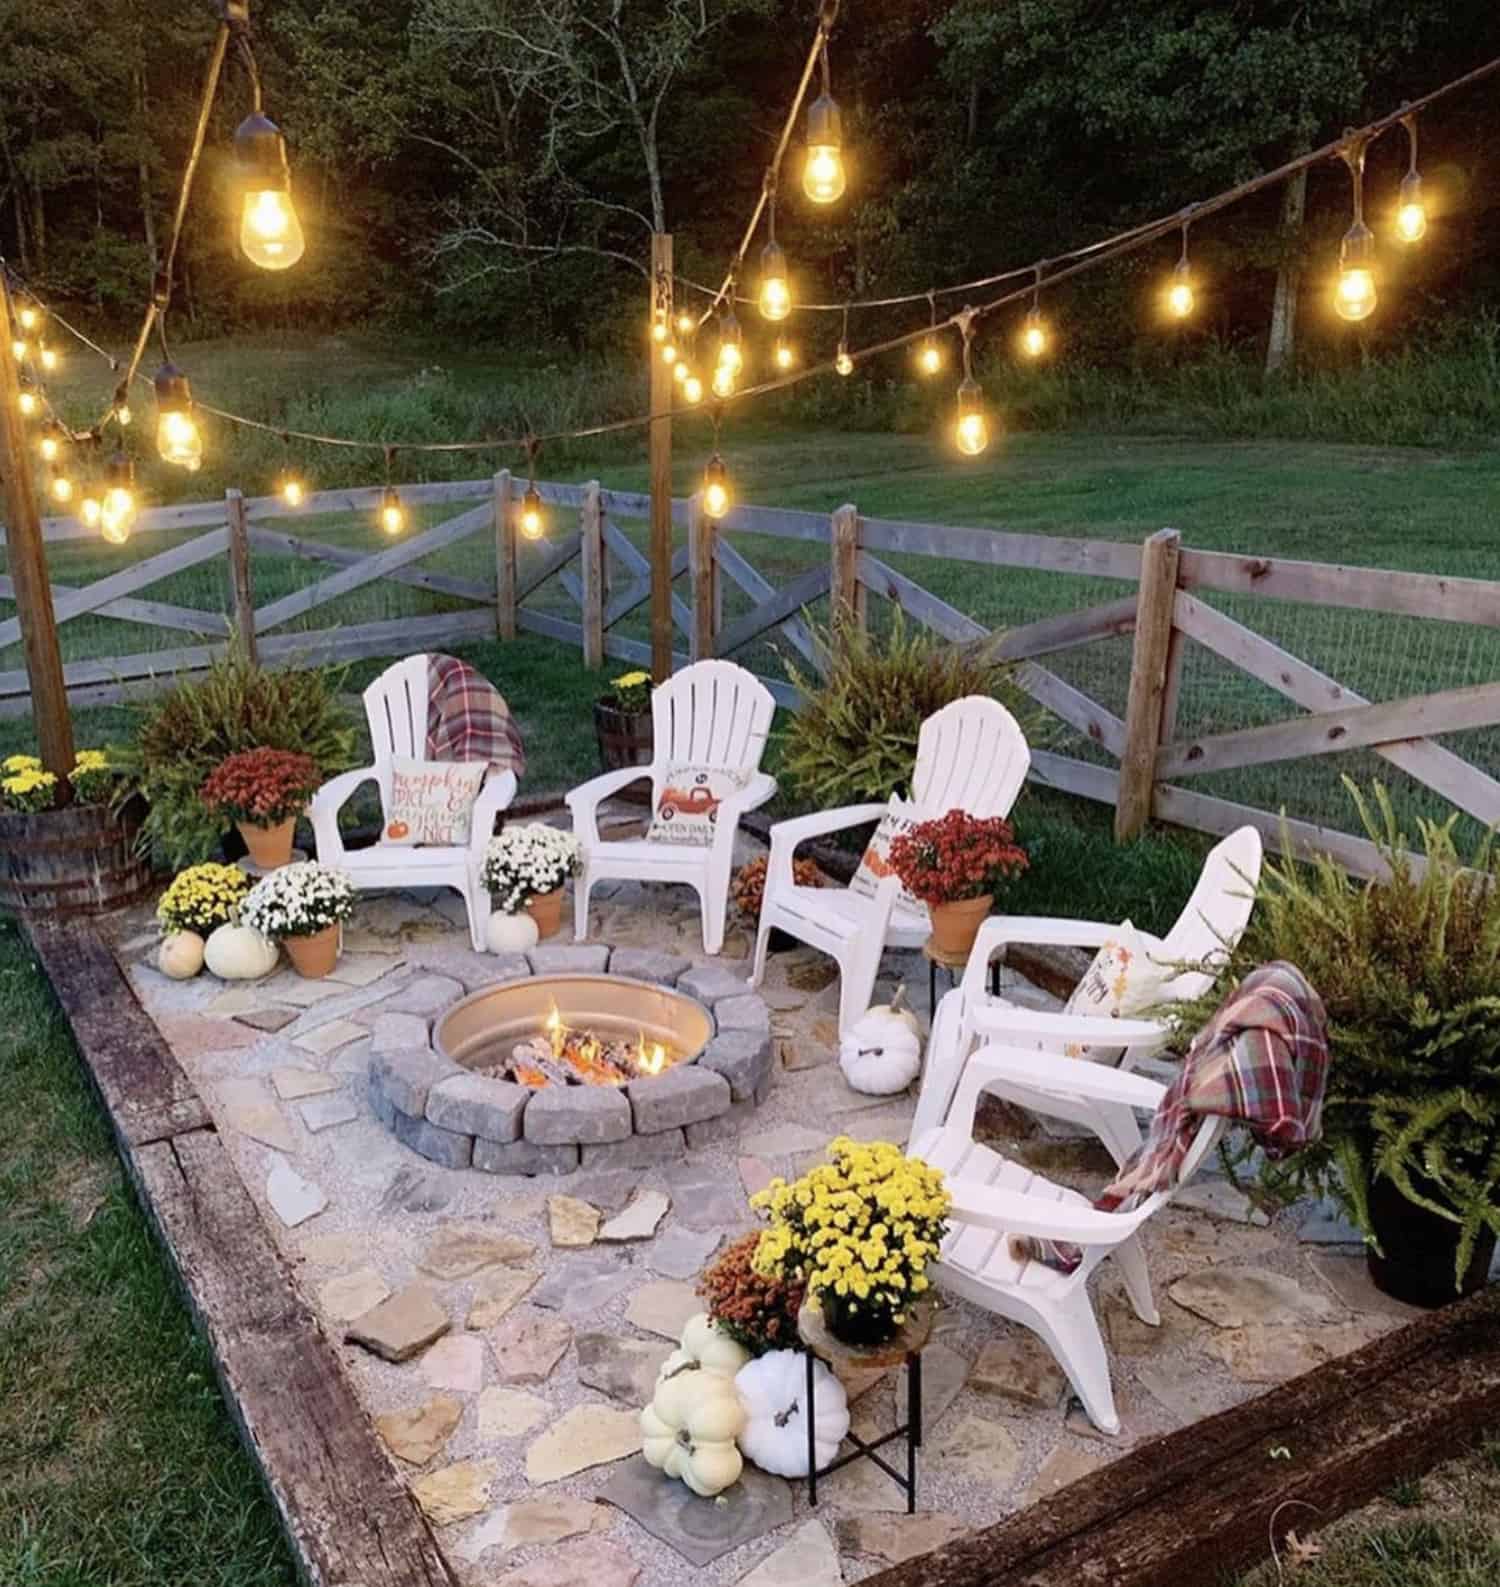 outdoor-patio-with-fireplace-twinkle-lights-and-fall-decorations